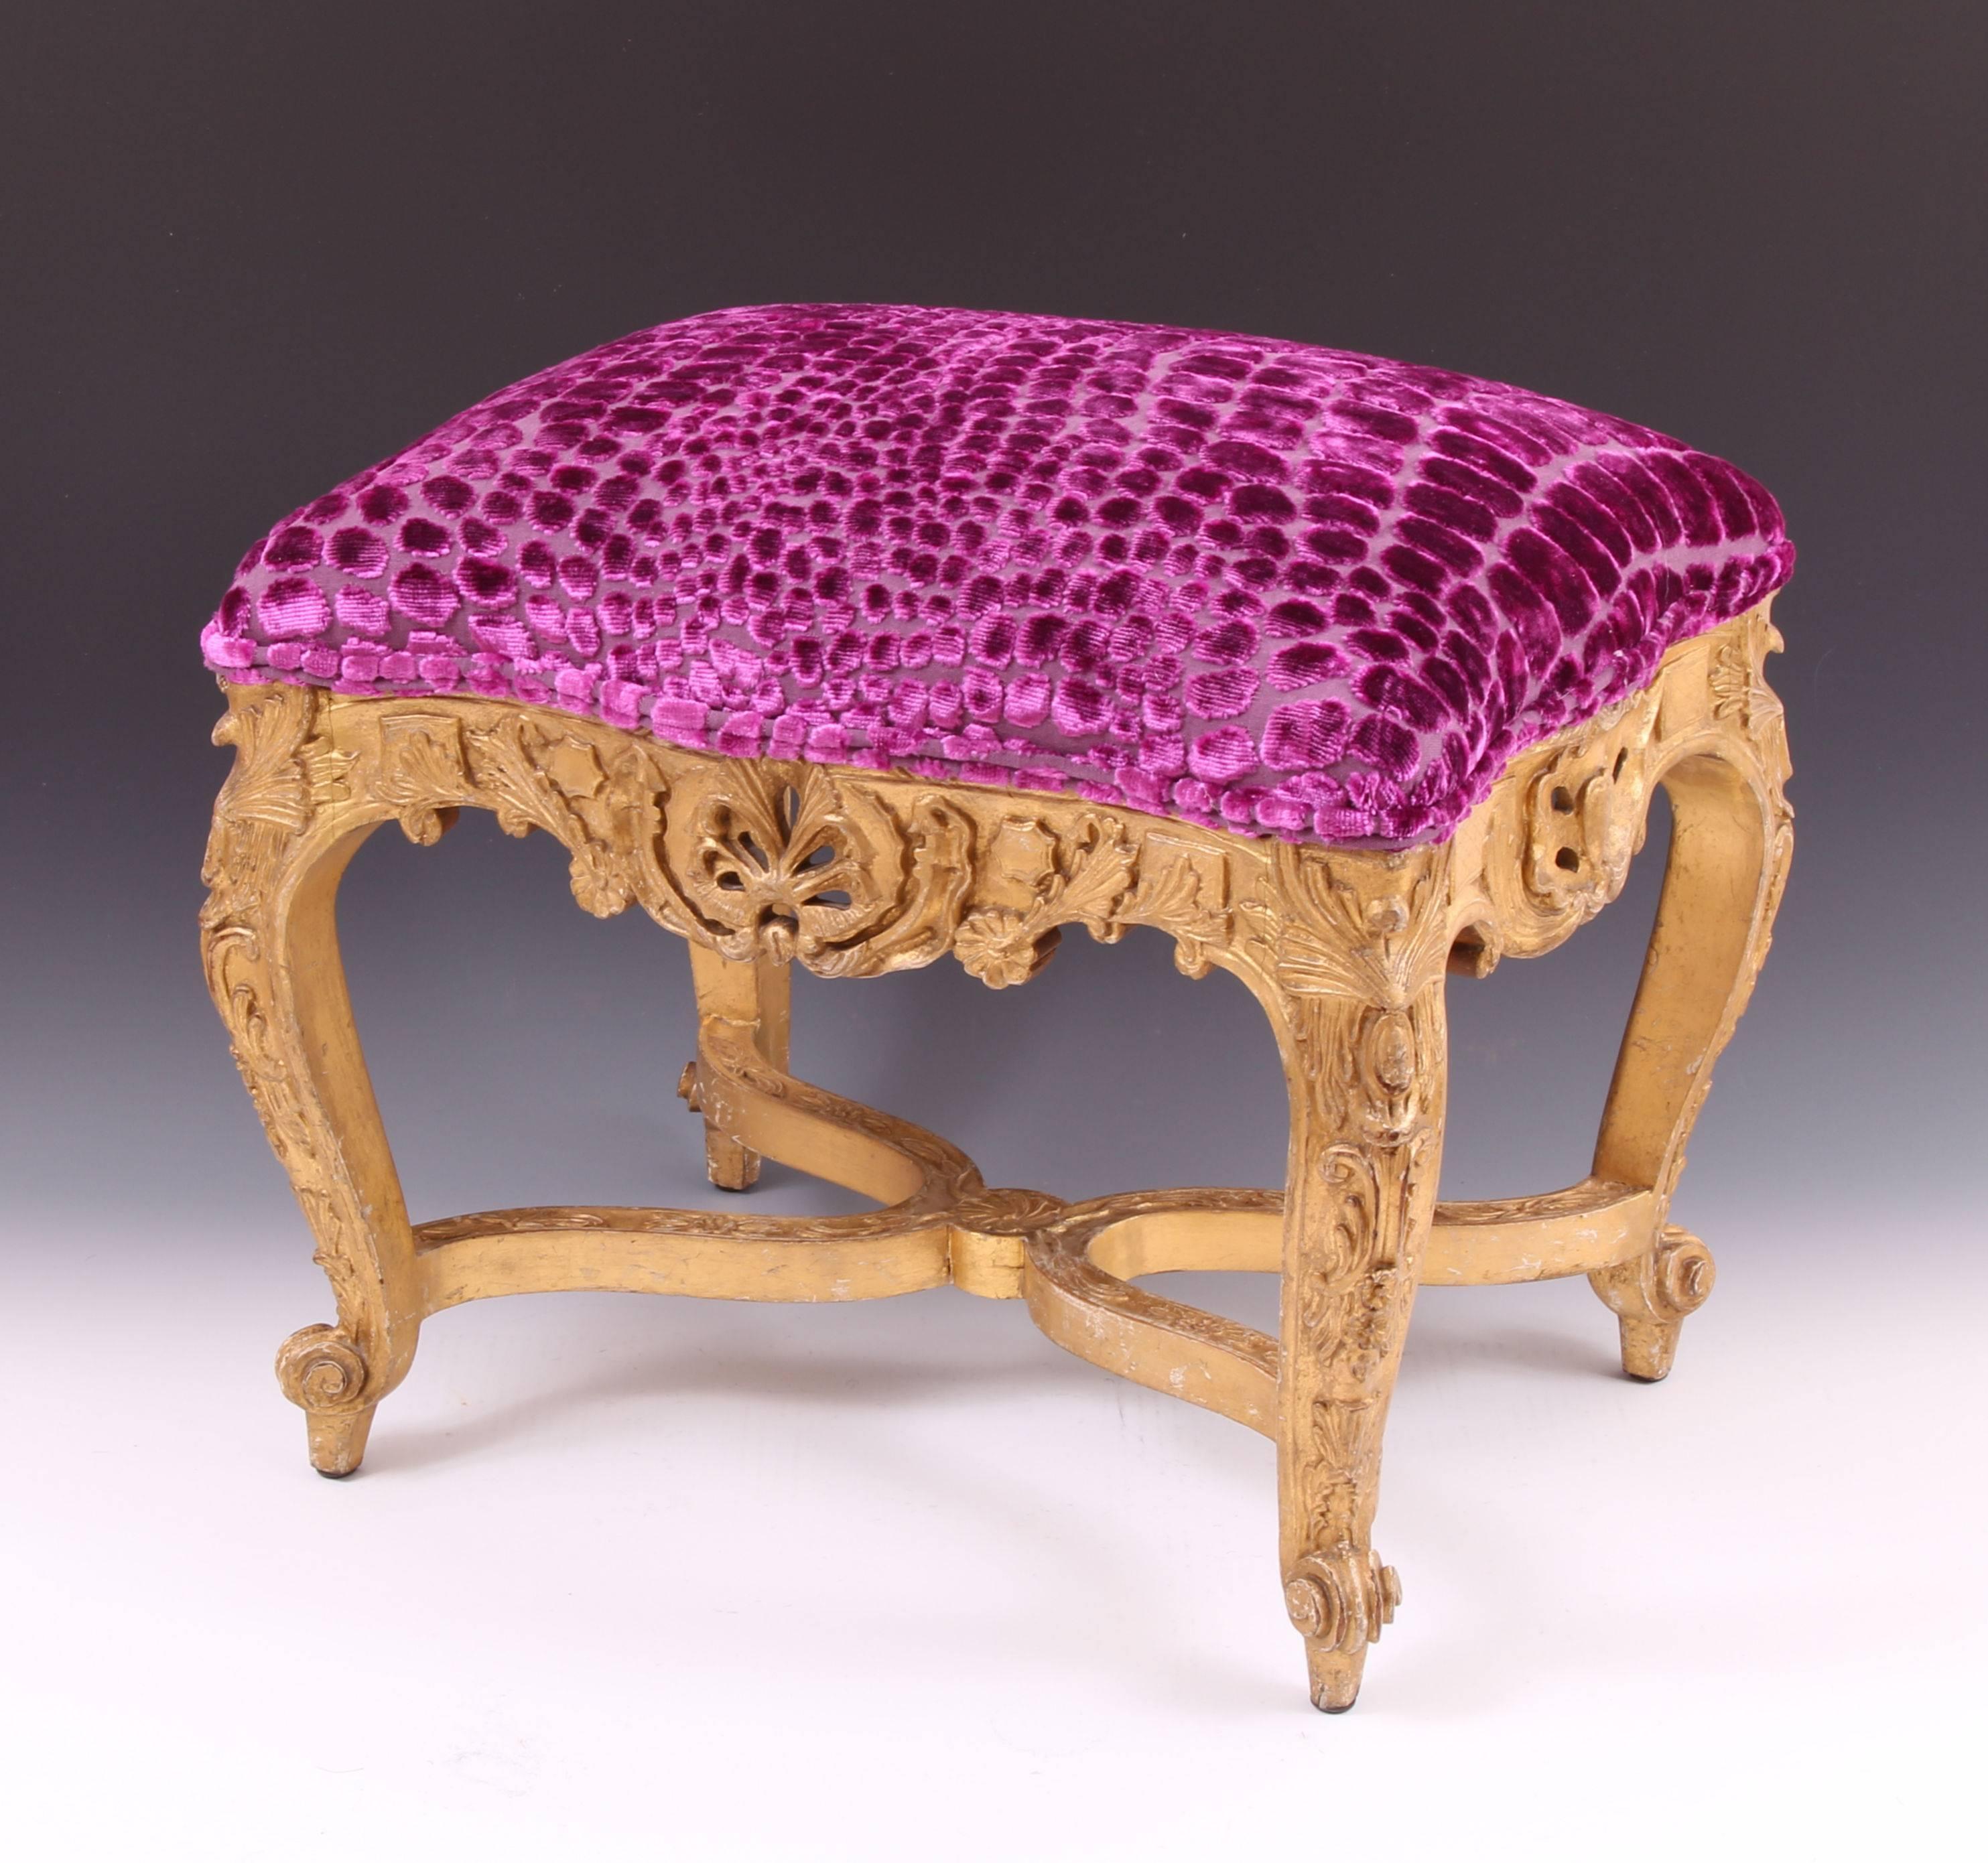 Antique 18th Century Louis XV Giltwood Stool In Excellent Condition In London, by appointment only